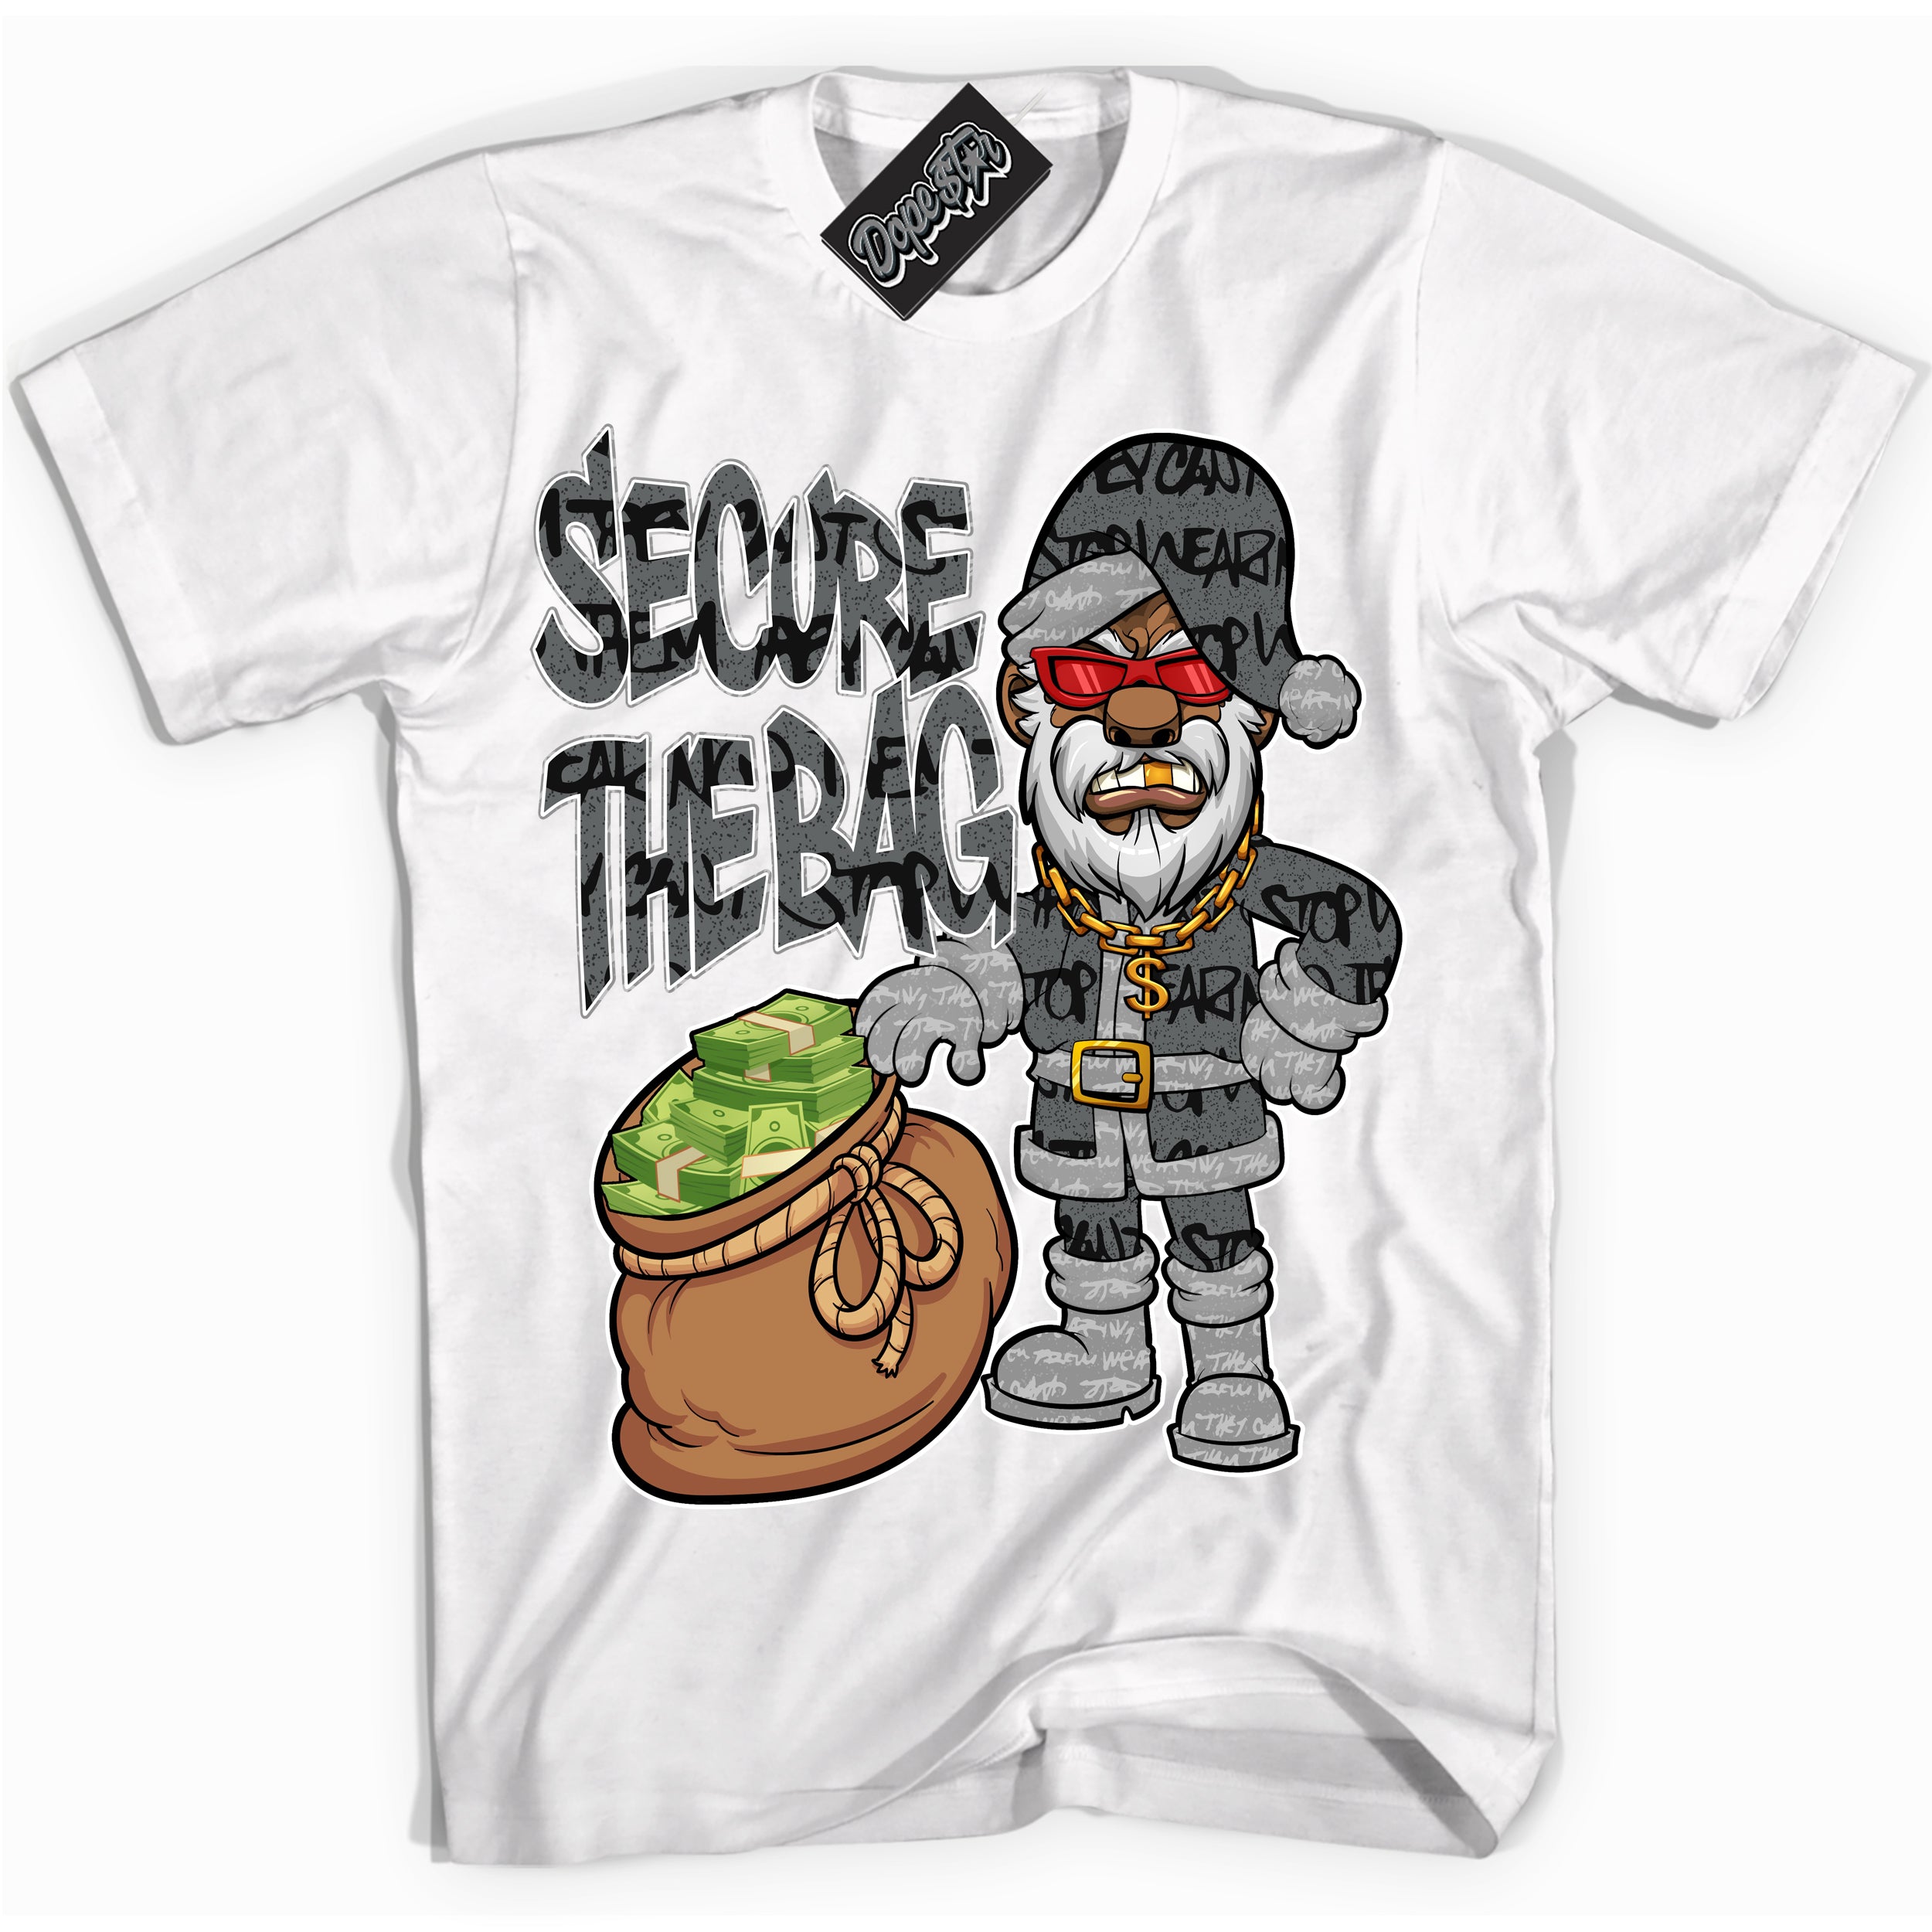 Cool White Shirt with “ Secure The Bag Santa ” design that perfectly matches Rebellionaire 1s Sneakers.